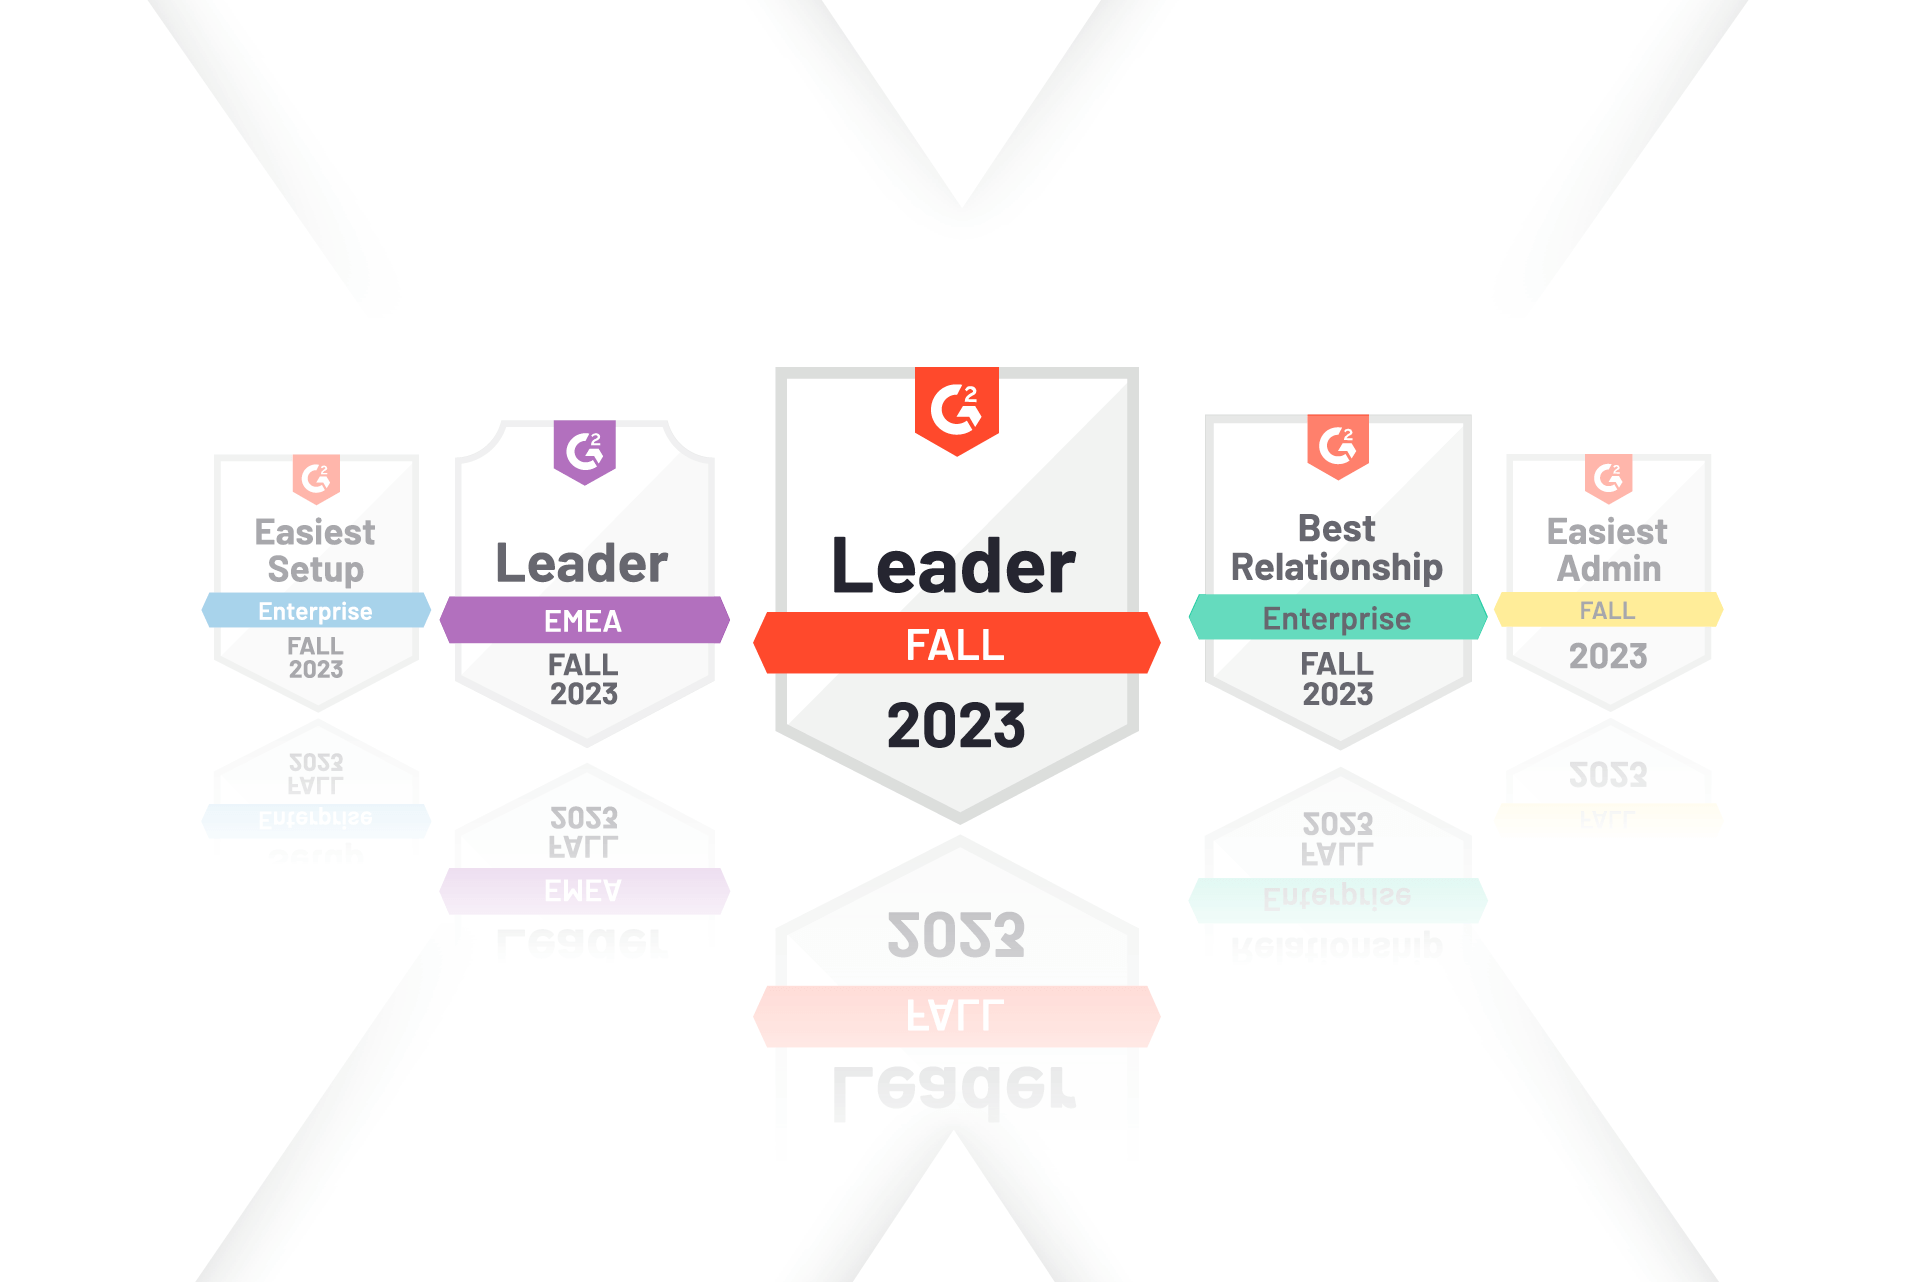 Speexx in G2's Fall Reports 2023